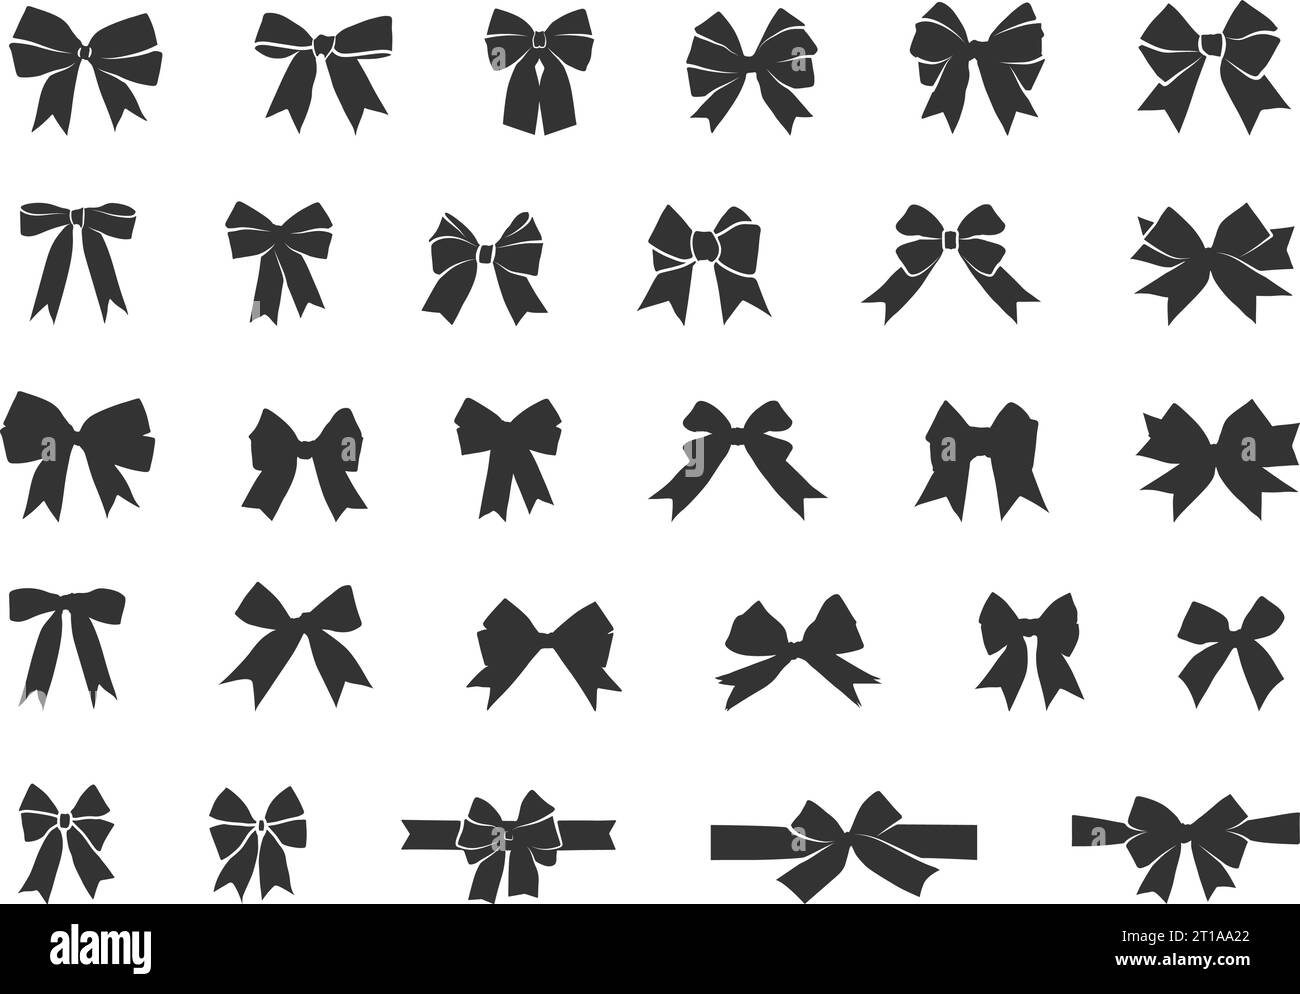 Hair ribbon bow bows Cut Out Stock Images & Pictures - Alamy